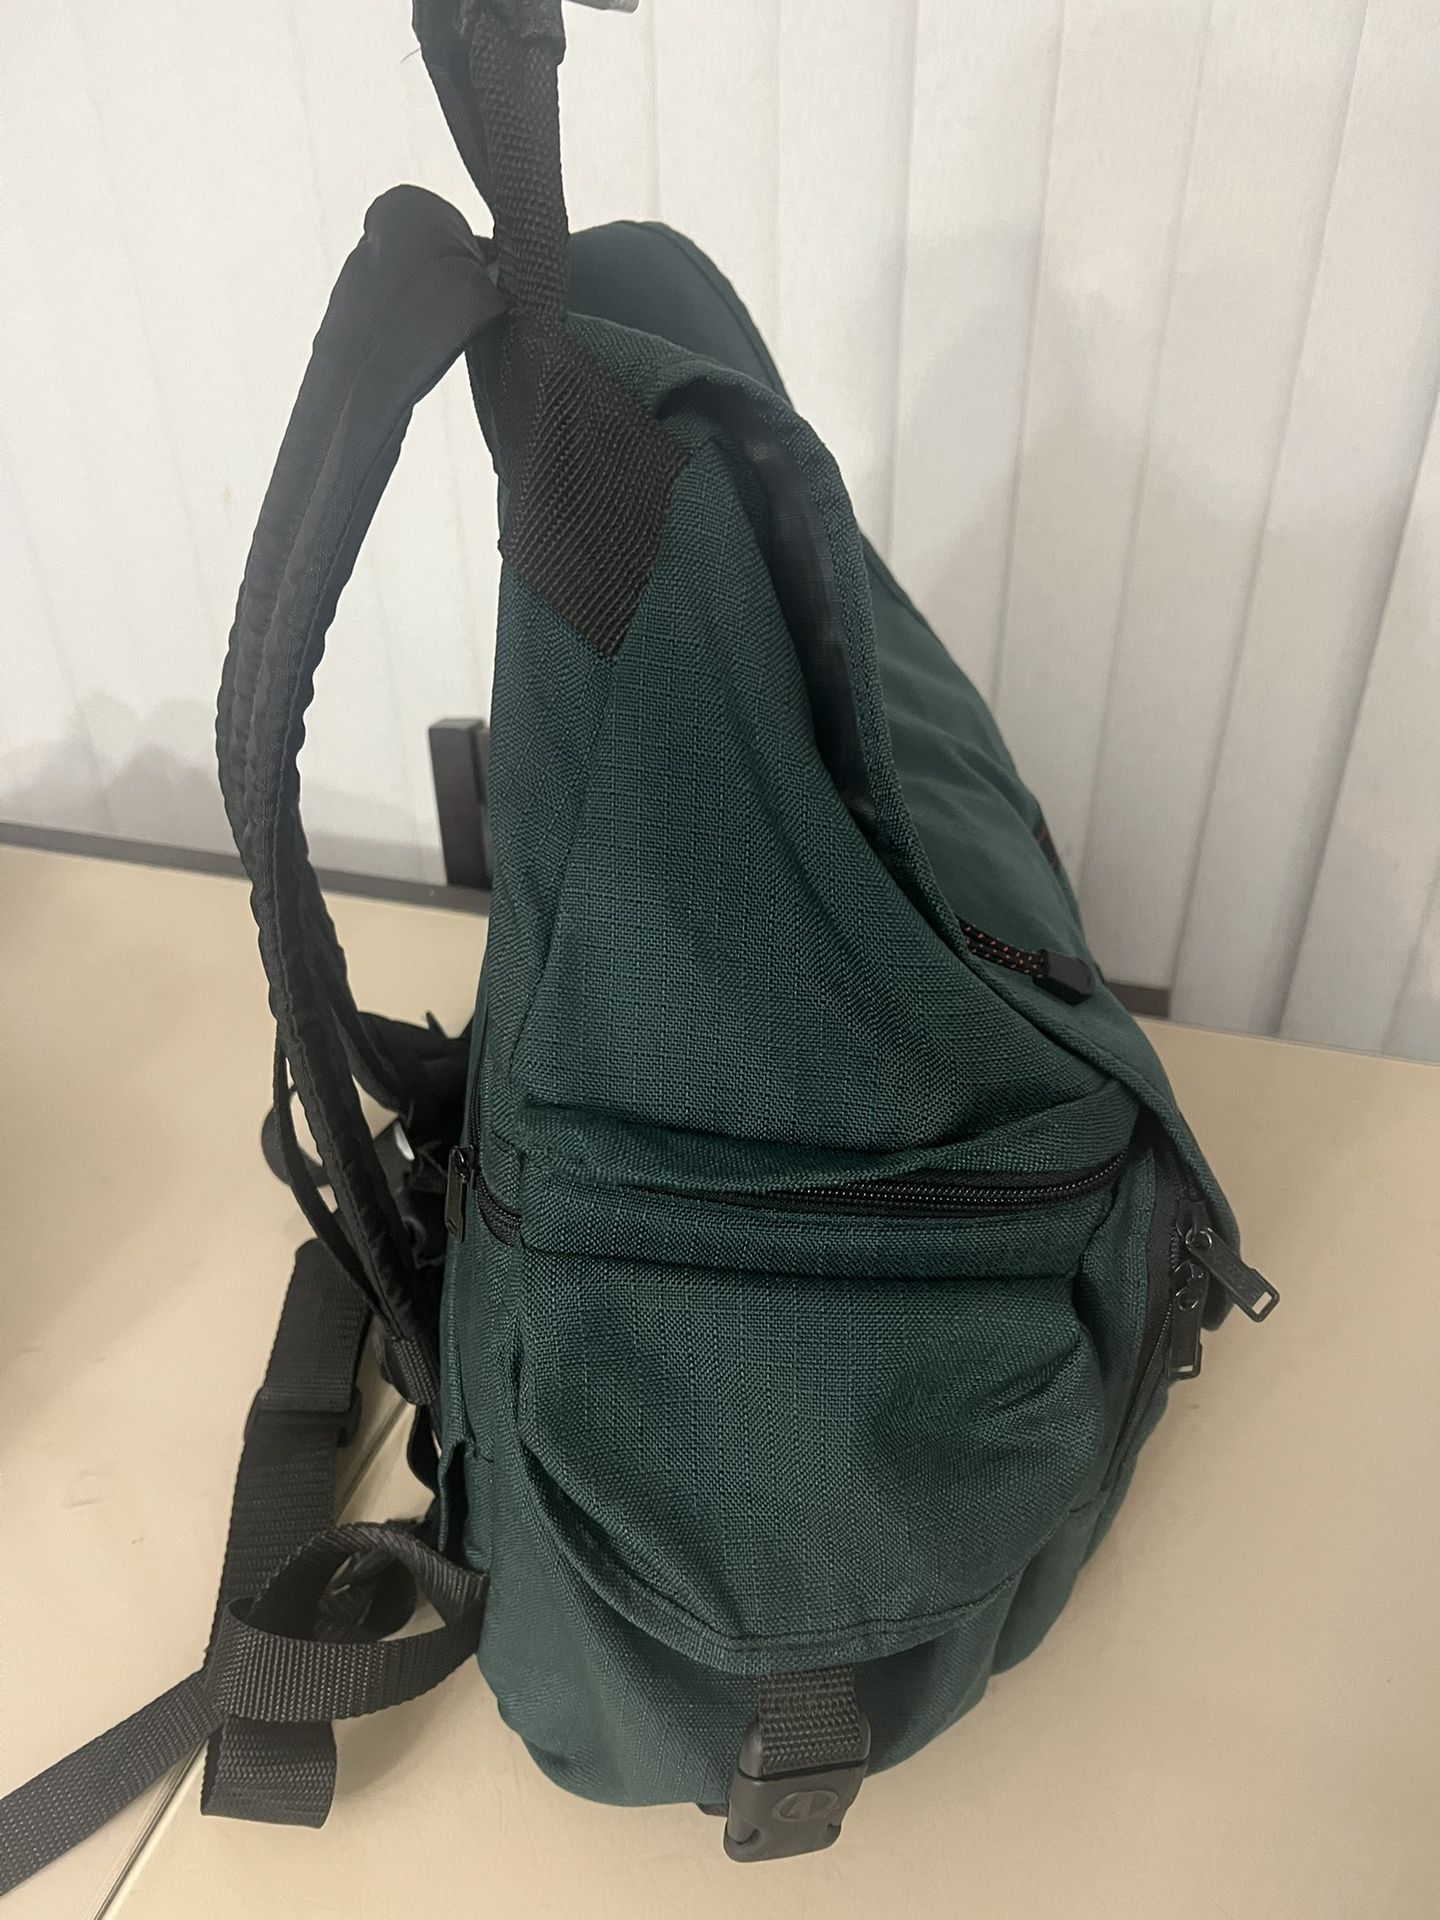 Tamrac 752 Green Photographer's Camera Backpack w/Modular Insert System. Large bag. Used in good condition and all clips fully functional. This bag is